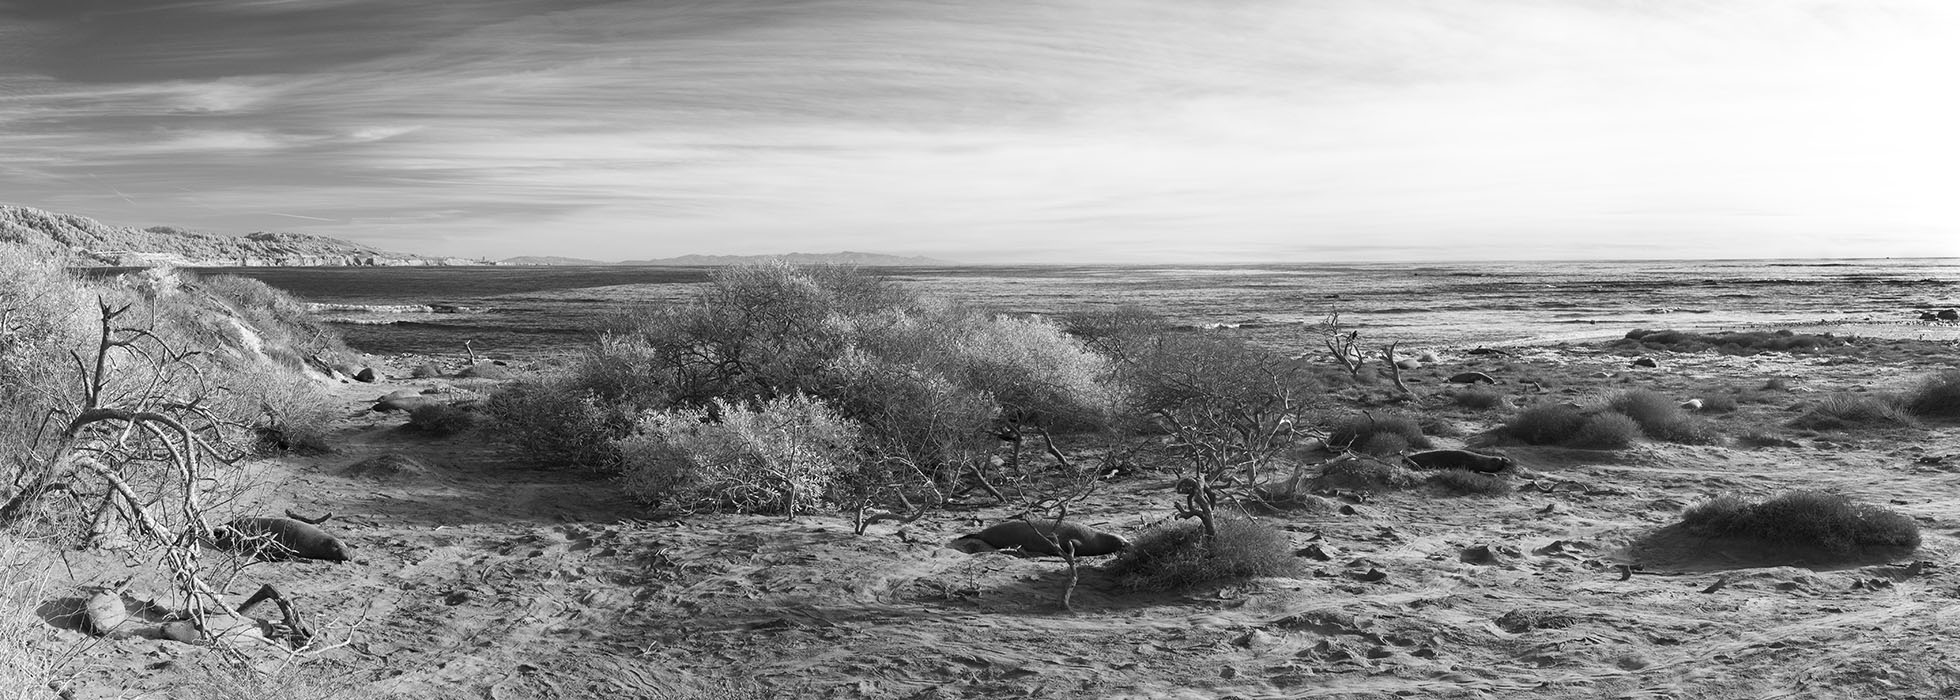 Infrared Panorama of Spiky Beach in Northern California, with Three Elephant Seals